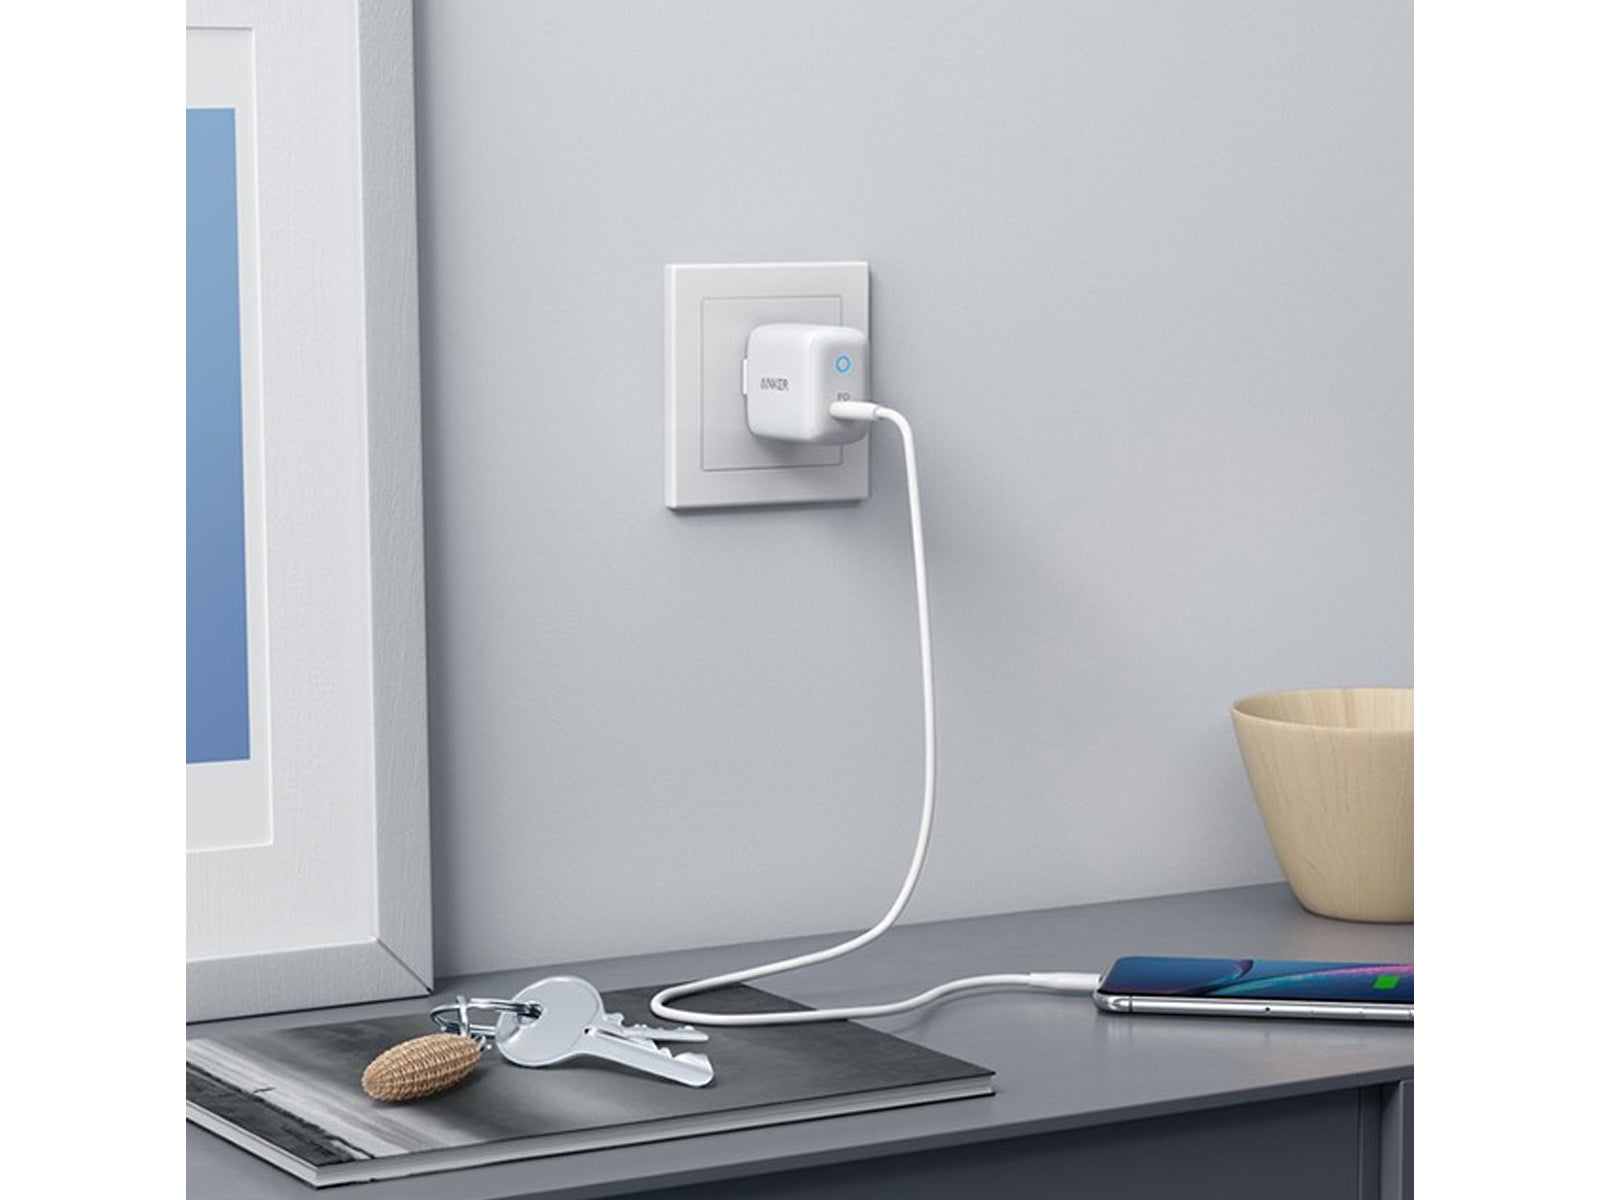 Image shows the Anker PowerPort PD USB-C 18W Fast Charger White plugged in